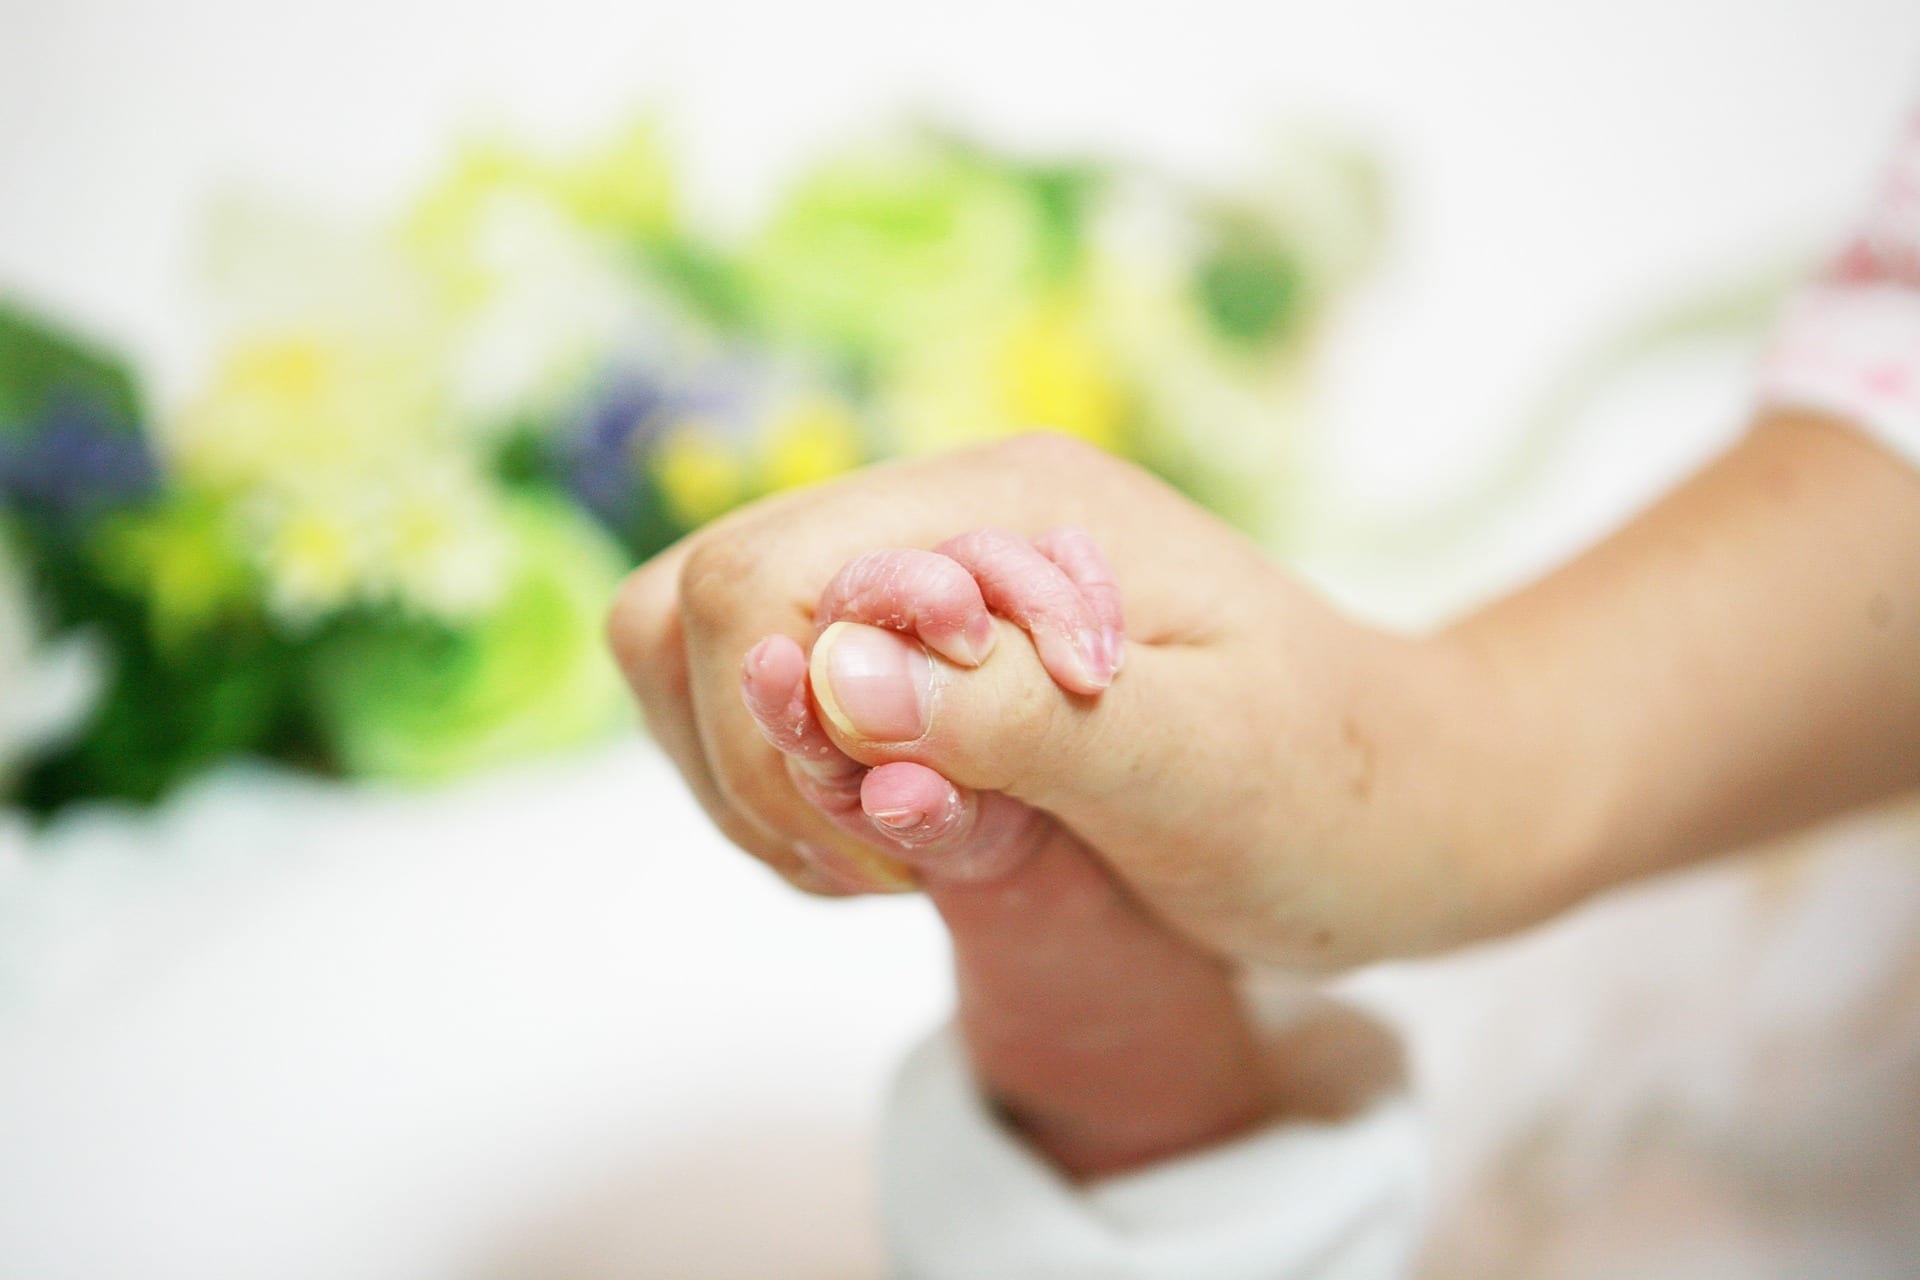 Mother and infant holding hands; image by hwanghyeongchae, via Pixabay, CC0.